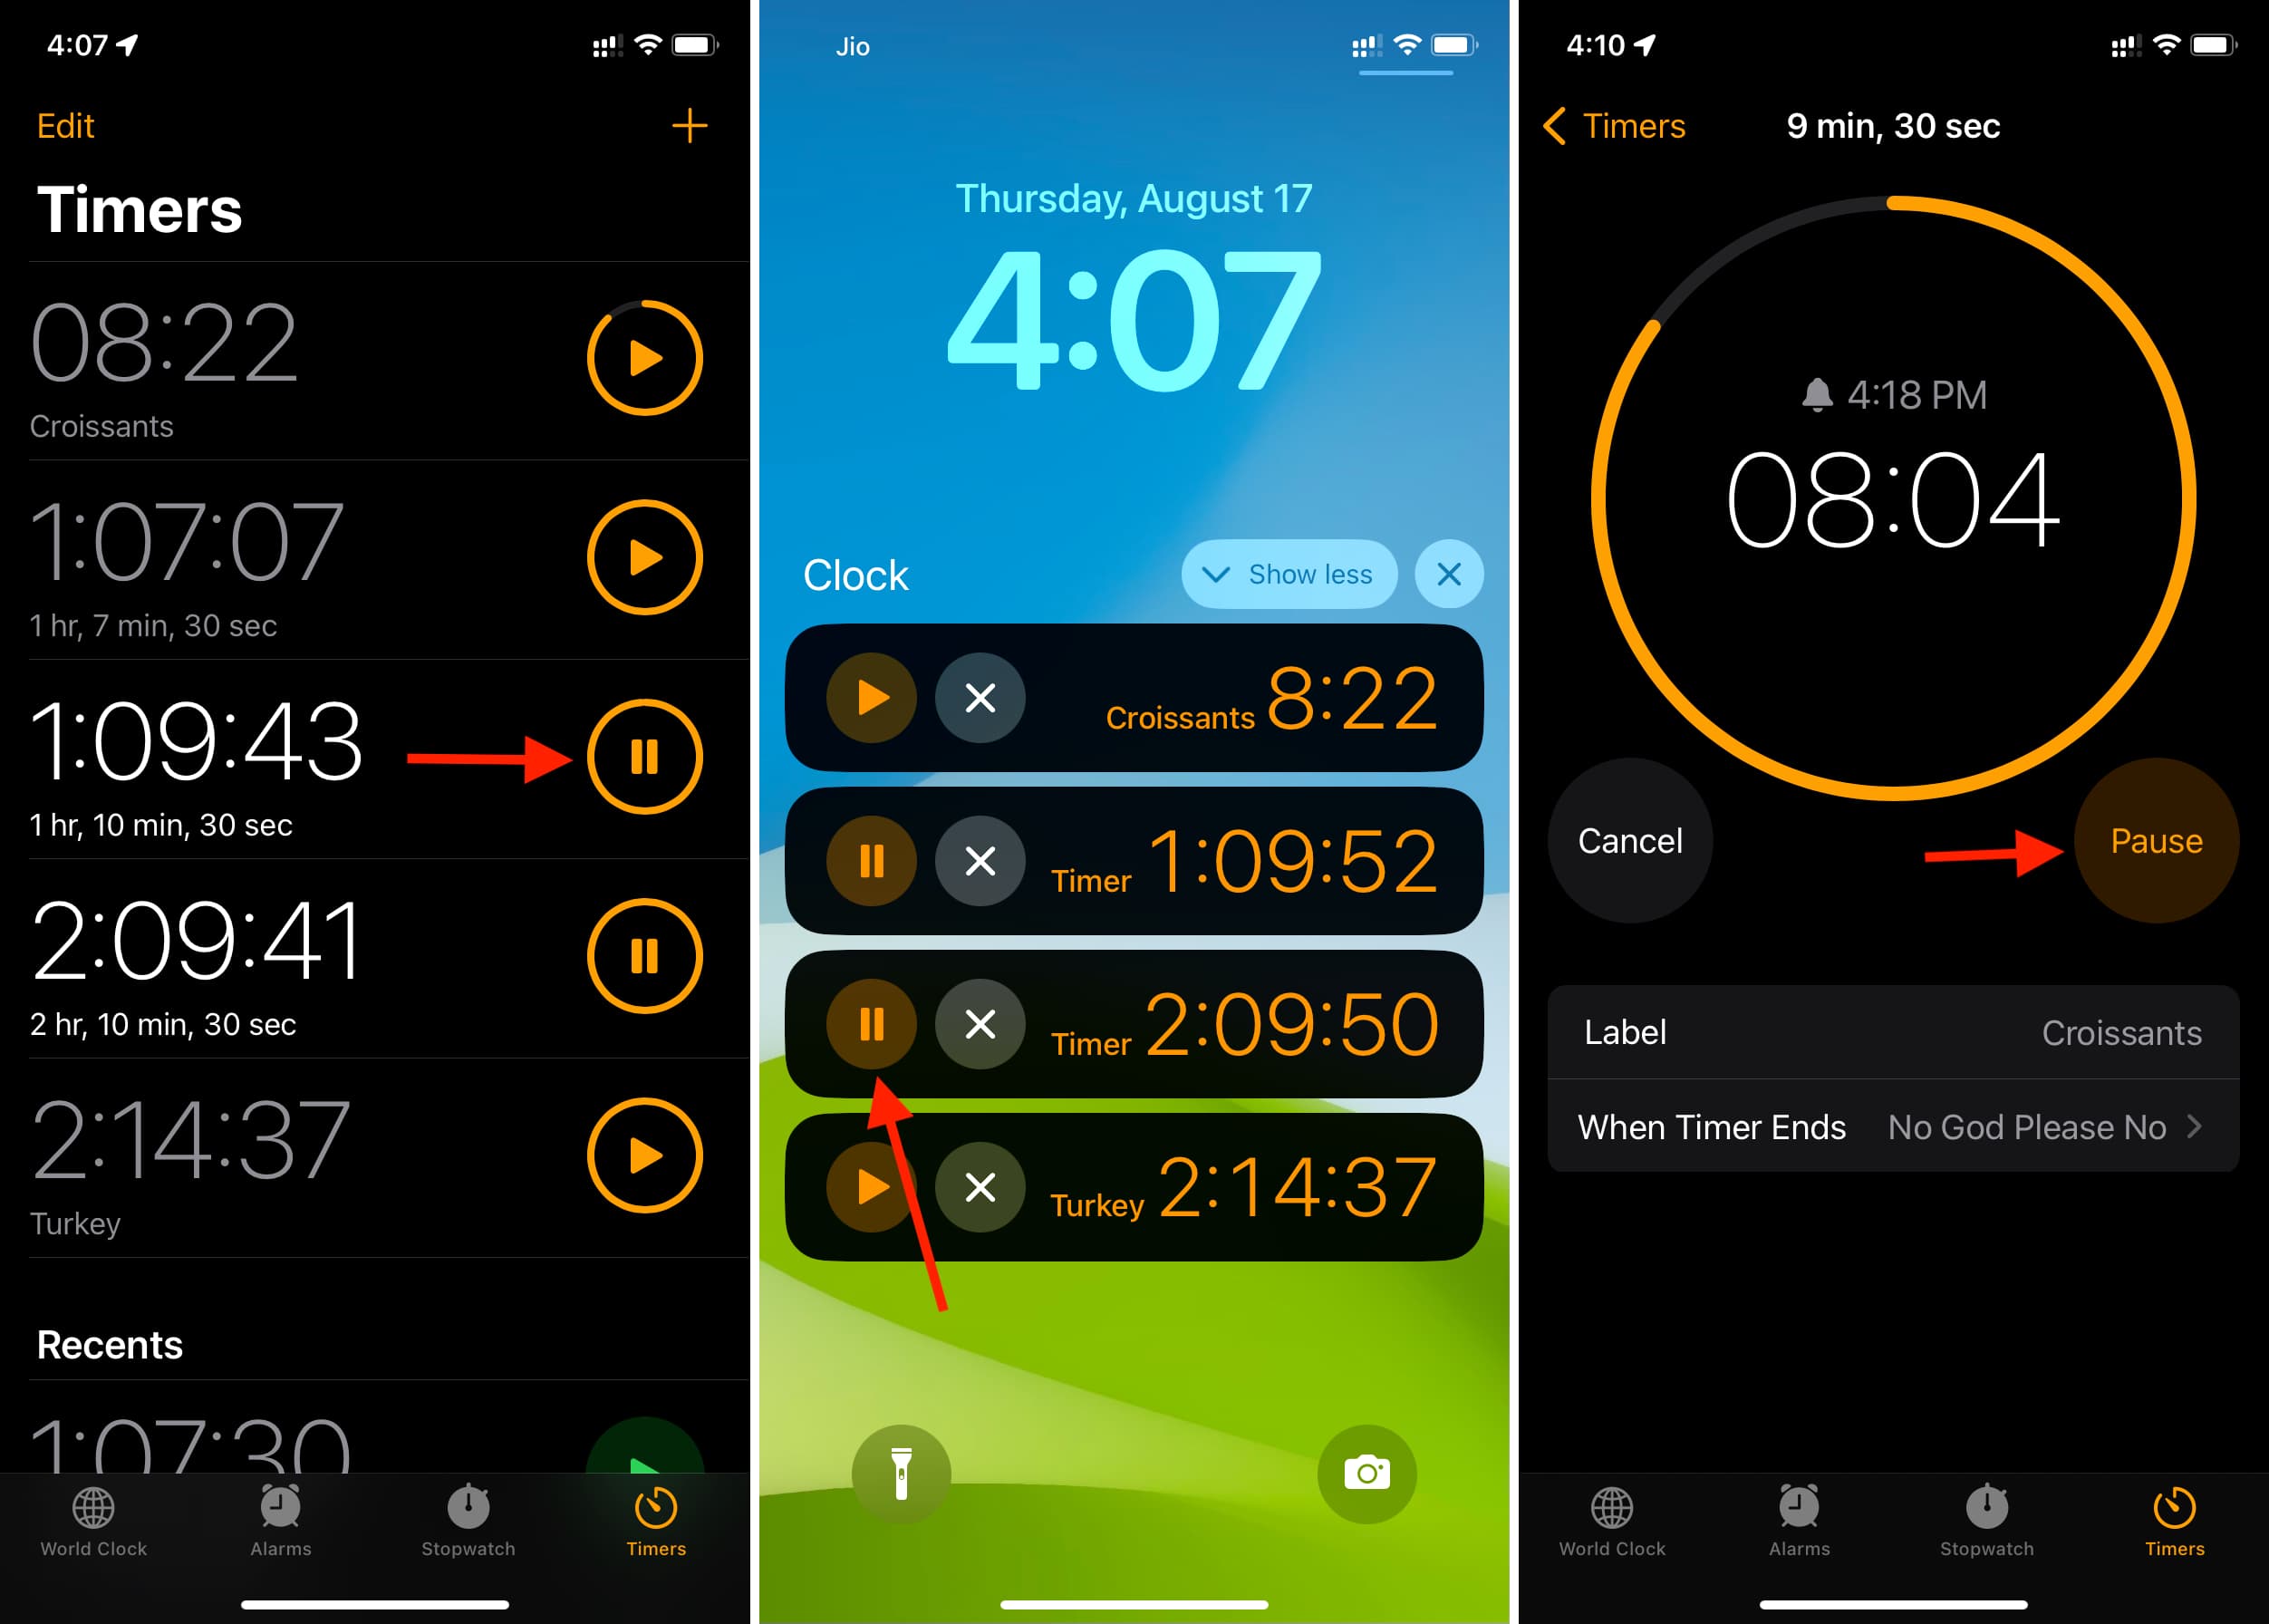 Three ways to pause running timers on iPhone